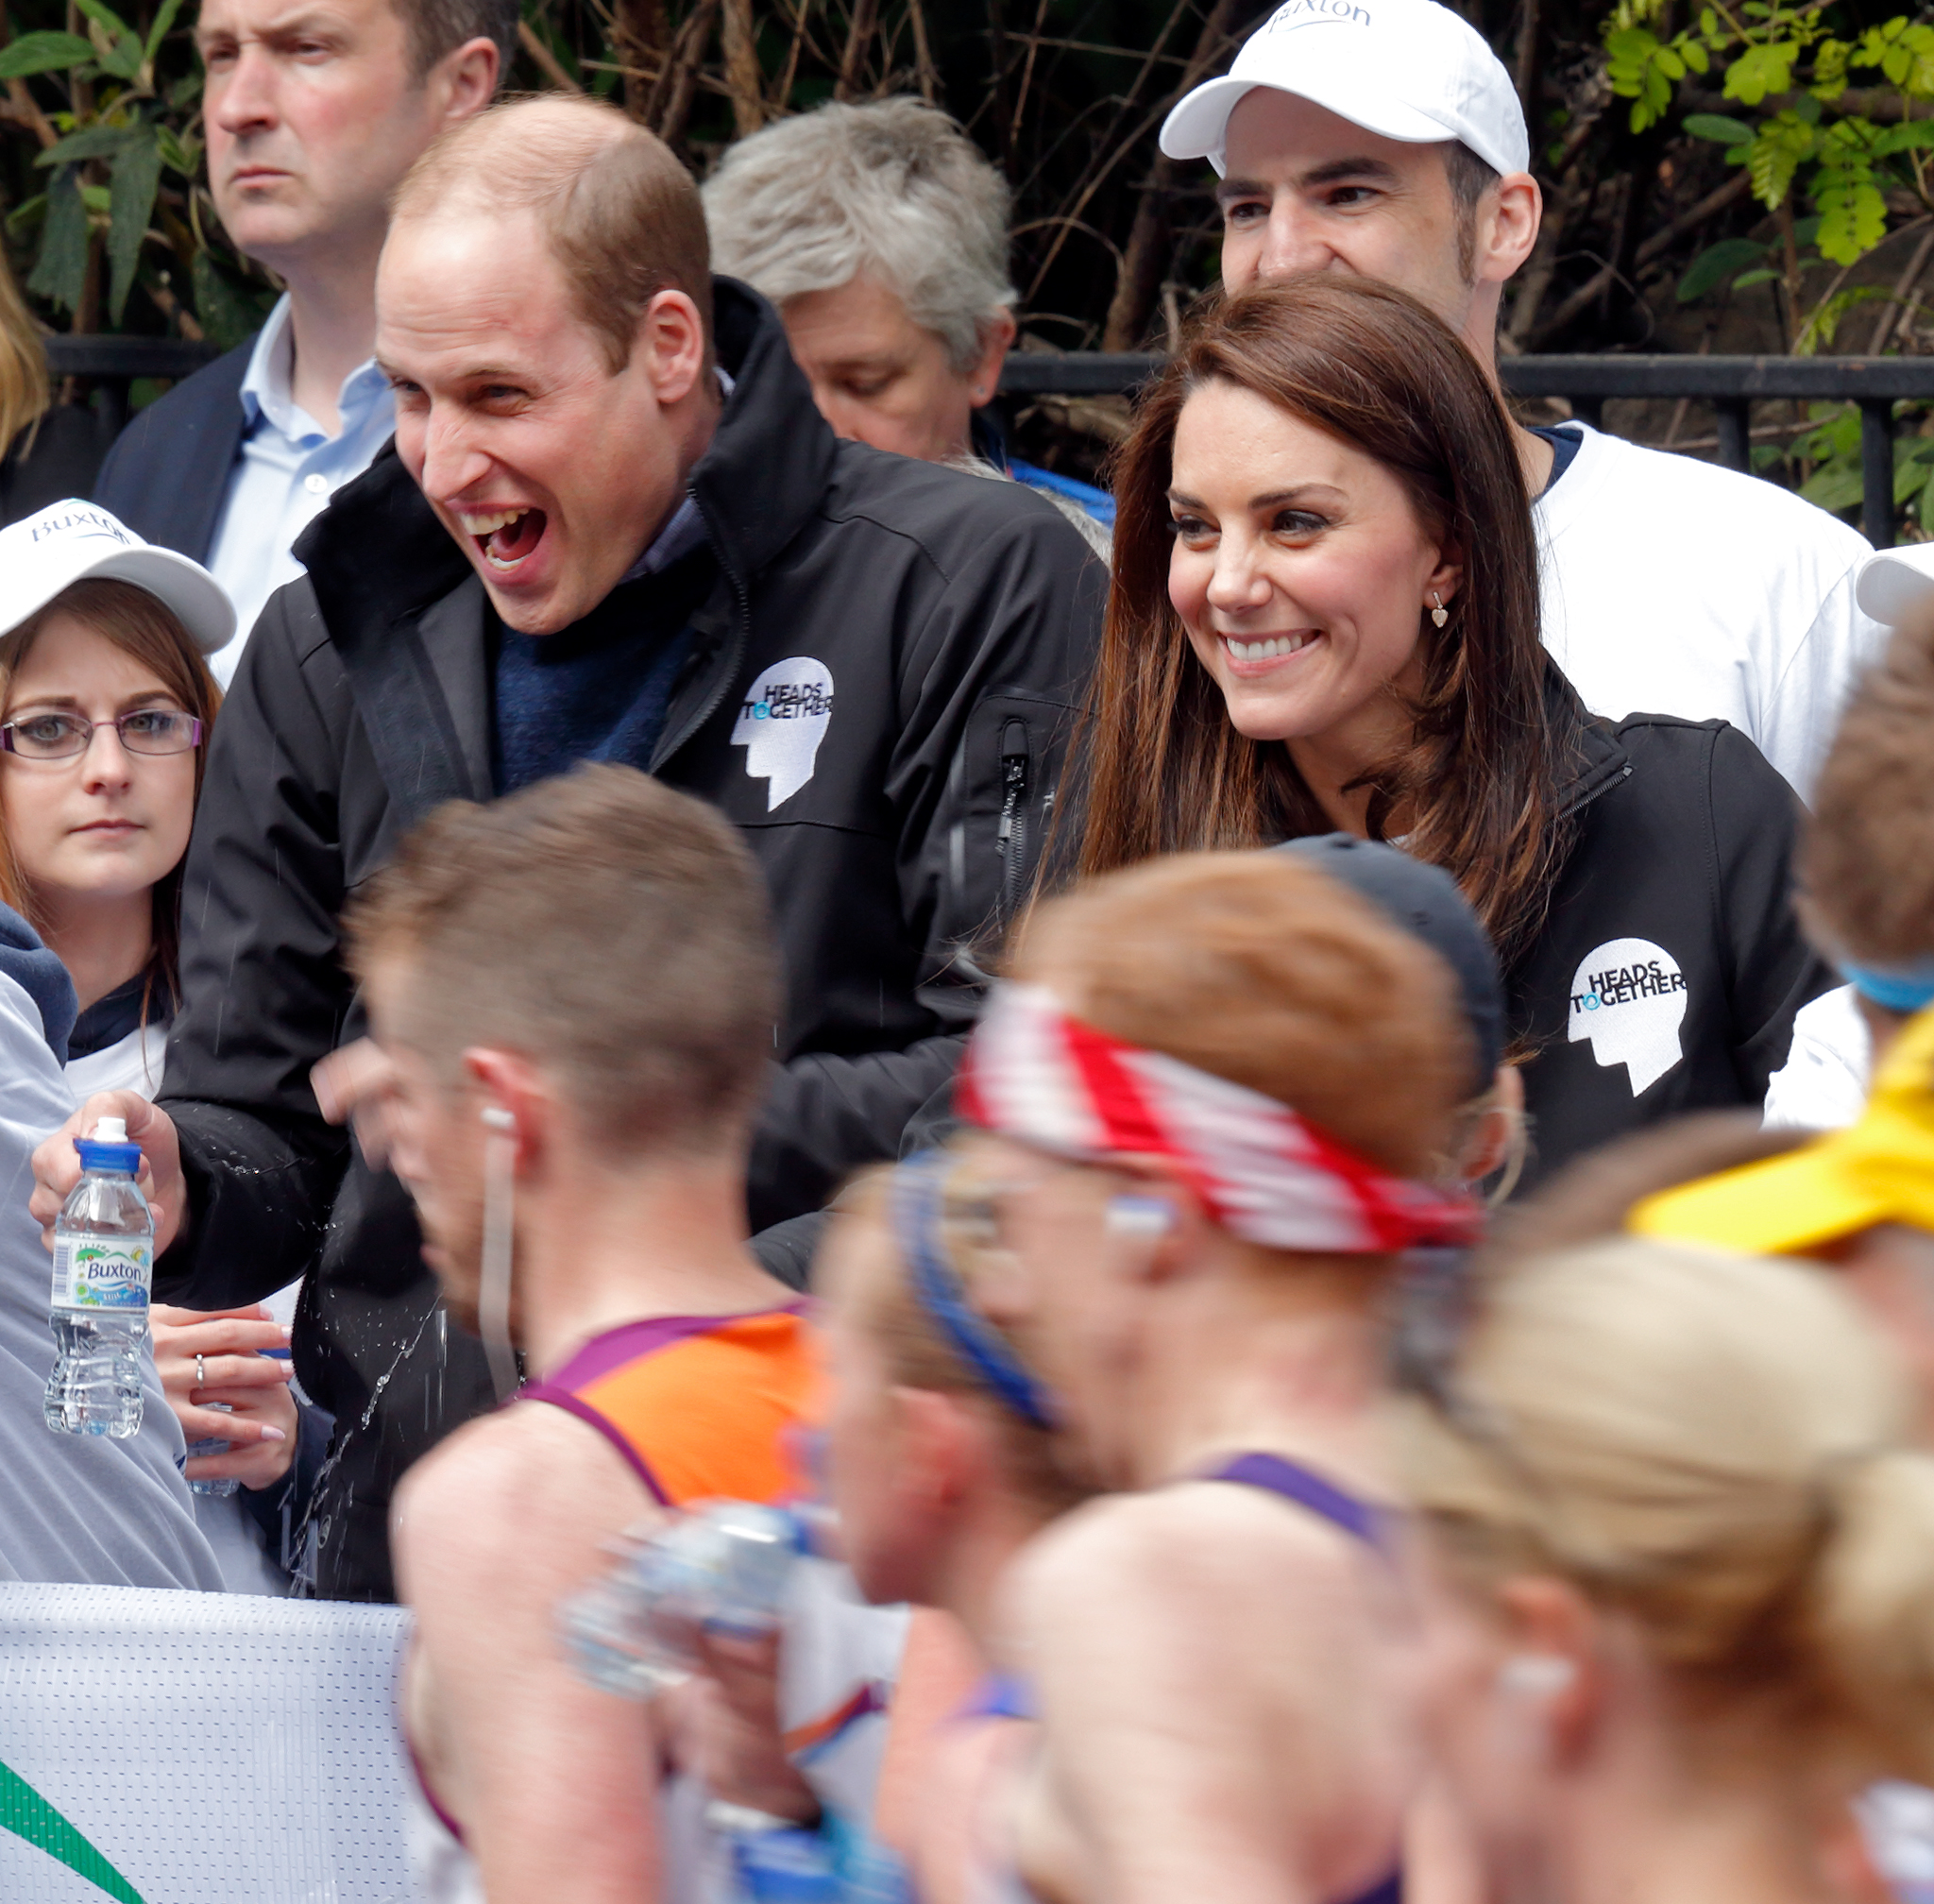 LONDON, UNITED KINGDOM - APRIL 23: (EMBARGOED FOR PUBLICATION IN UK NEWSPAPERS UNTIL 48 HOURS AFTER CREATE DATE AND TIME) Prince William, Duke of Cambridge is squirted with water as he &amp; Catherine, Duchess of Cambridge hand out water to runners taking part in the 2017 Virgin Money London Marathon on April 23, 2017 in London, England. The Heads Together mental heath campaign, spearheaded by The Duke &amp; Duchess of Cambridge and Prince Harry, is the marathon's 2017 Charity of the Year. (Photo by Max Mumby/Indigo/Getty Images) (Max Mumby—Getty Images)